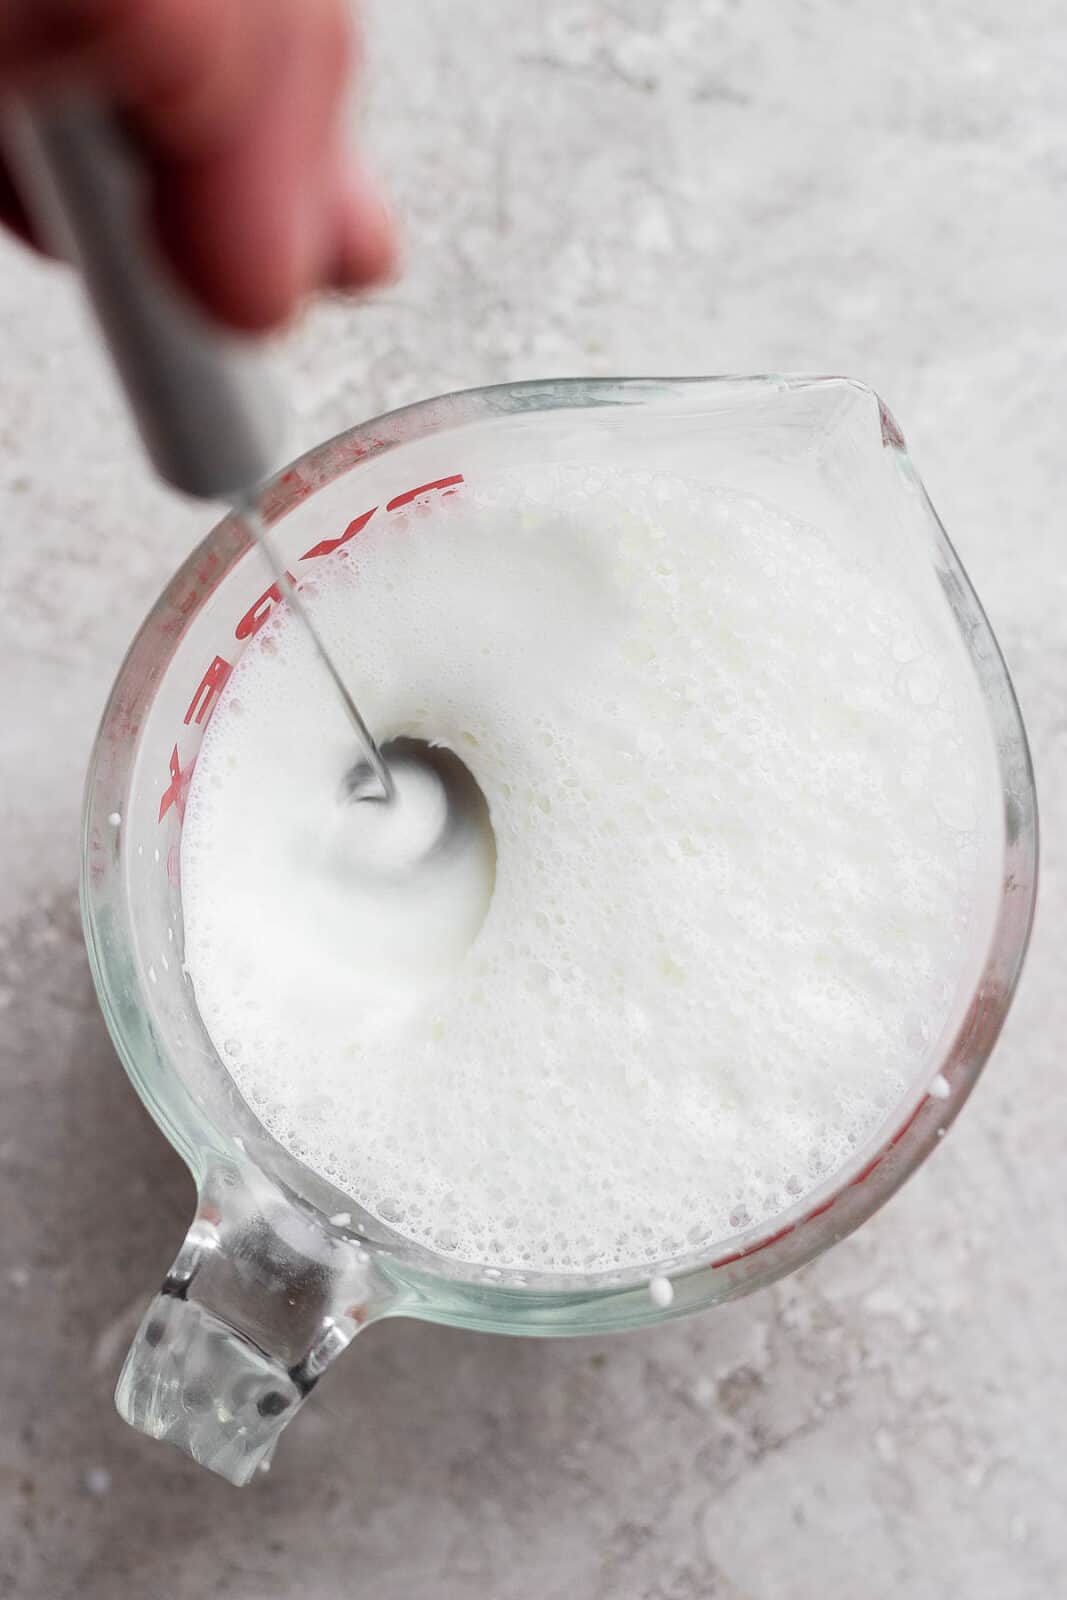 Handheld frother in a measuring cup with sweet cream cold foam ingredients.